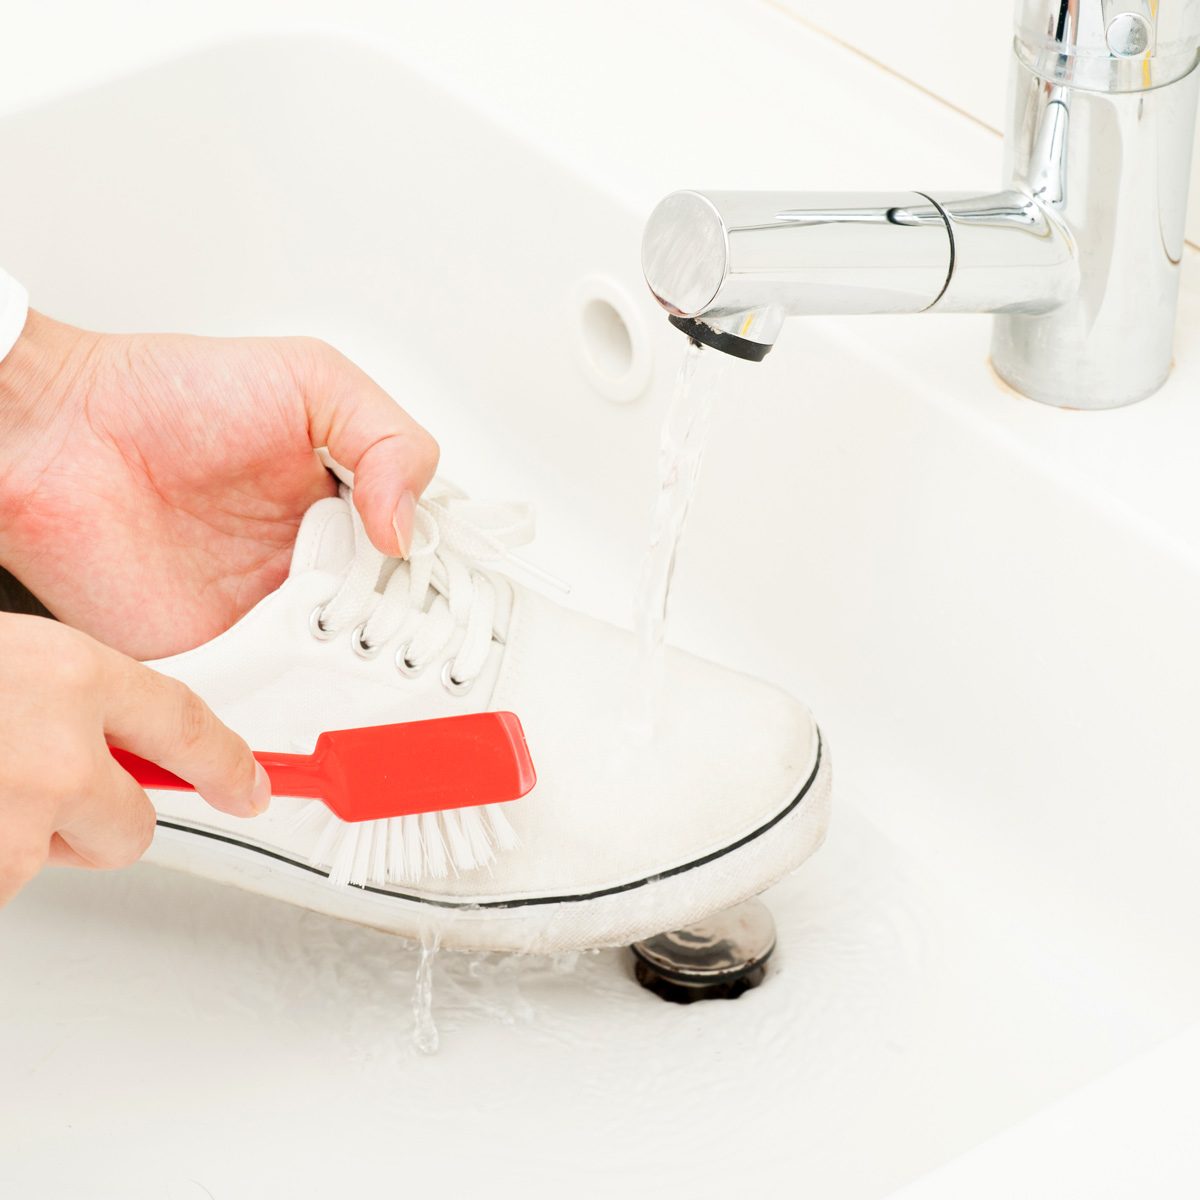 8 Tips on How to Clean White Shoes | Family Handyman